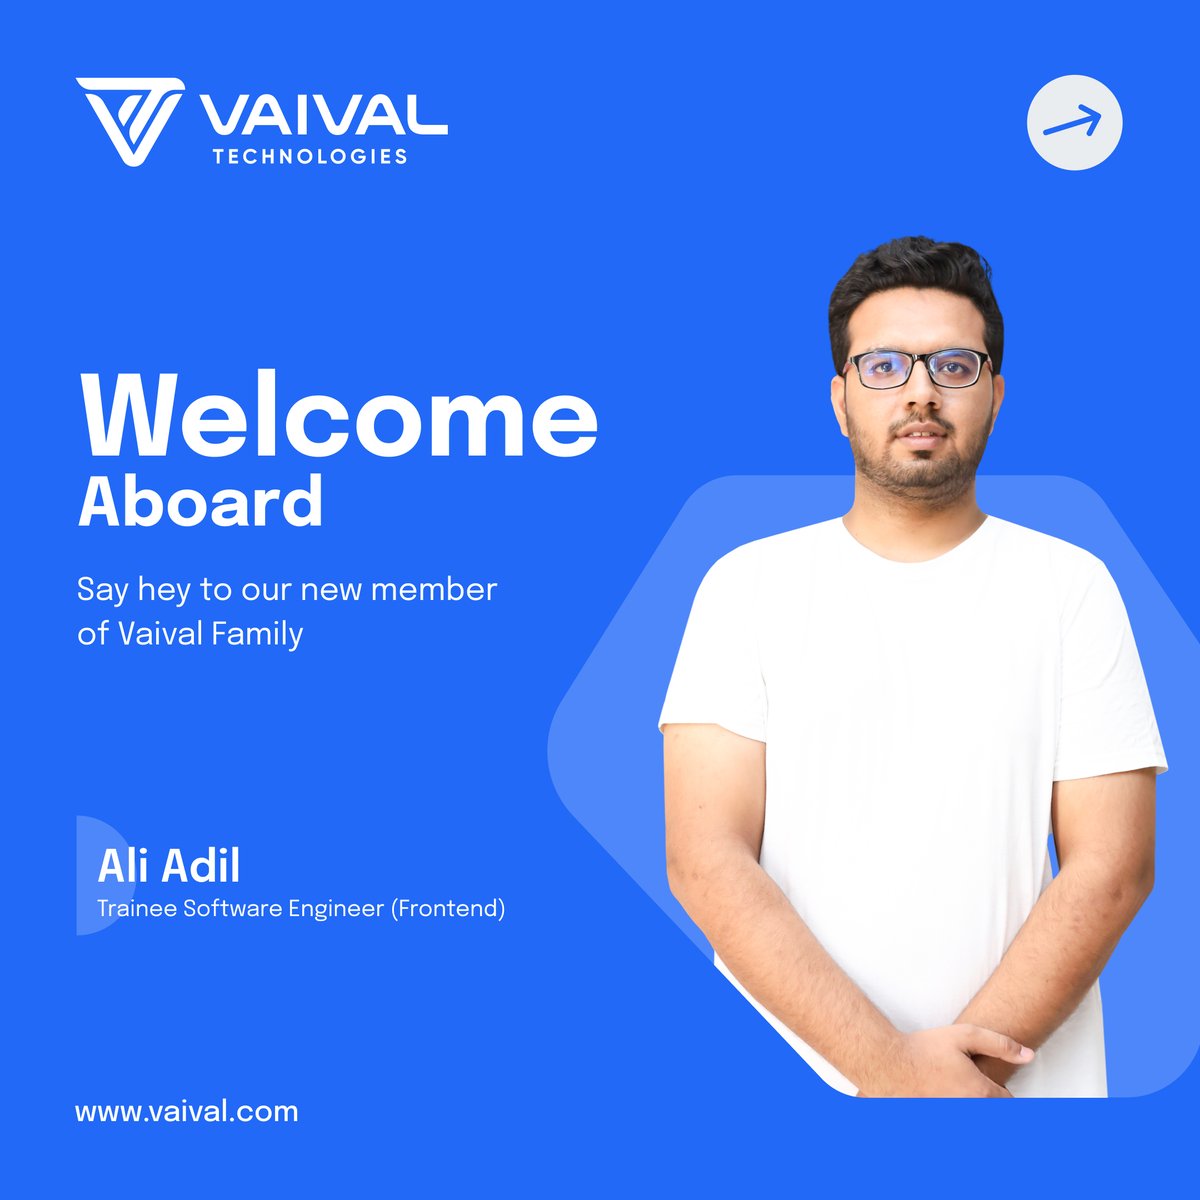 Please join us in welcoming Ali Adil to Vaival Technologies LLC as a Trainee Software Engineer (Frontend)! 💙

He is passionate about frontend development & has a knack for creating user-friendly & visually appealing interfaces.

We are glad to have Ali in the team. 

#NewHiring